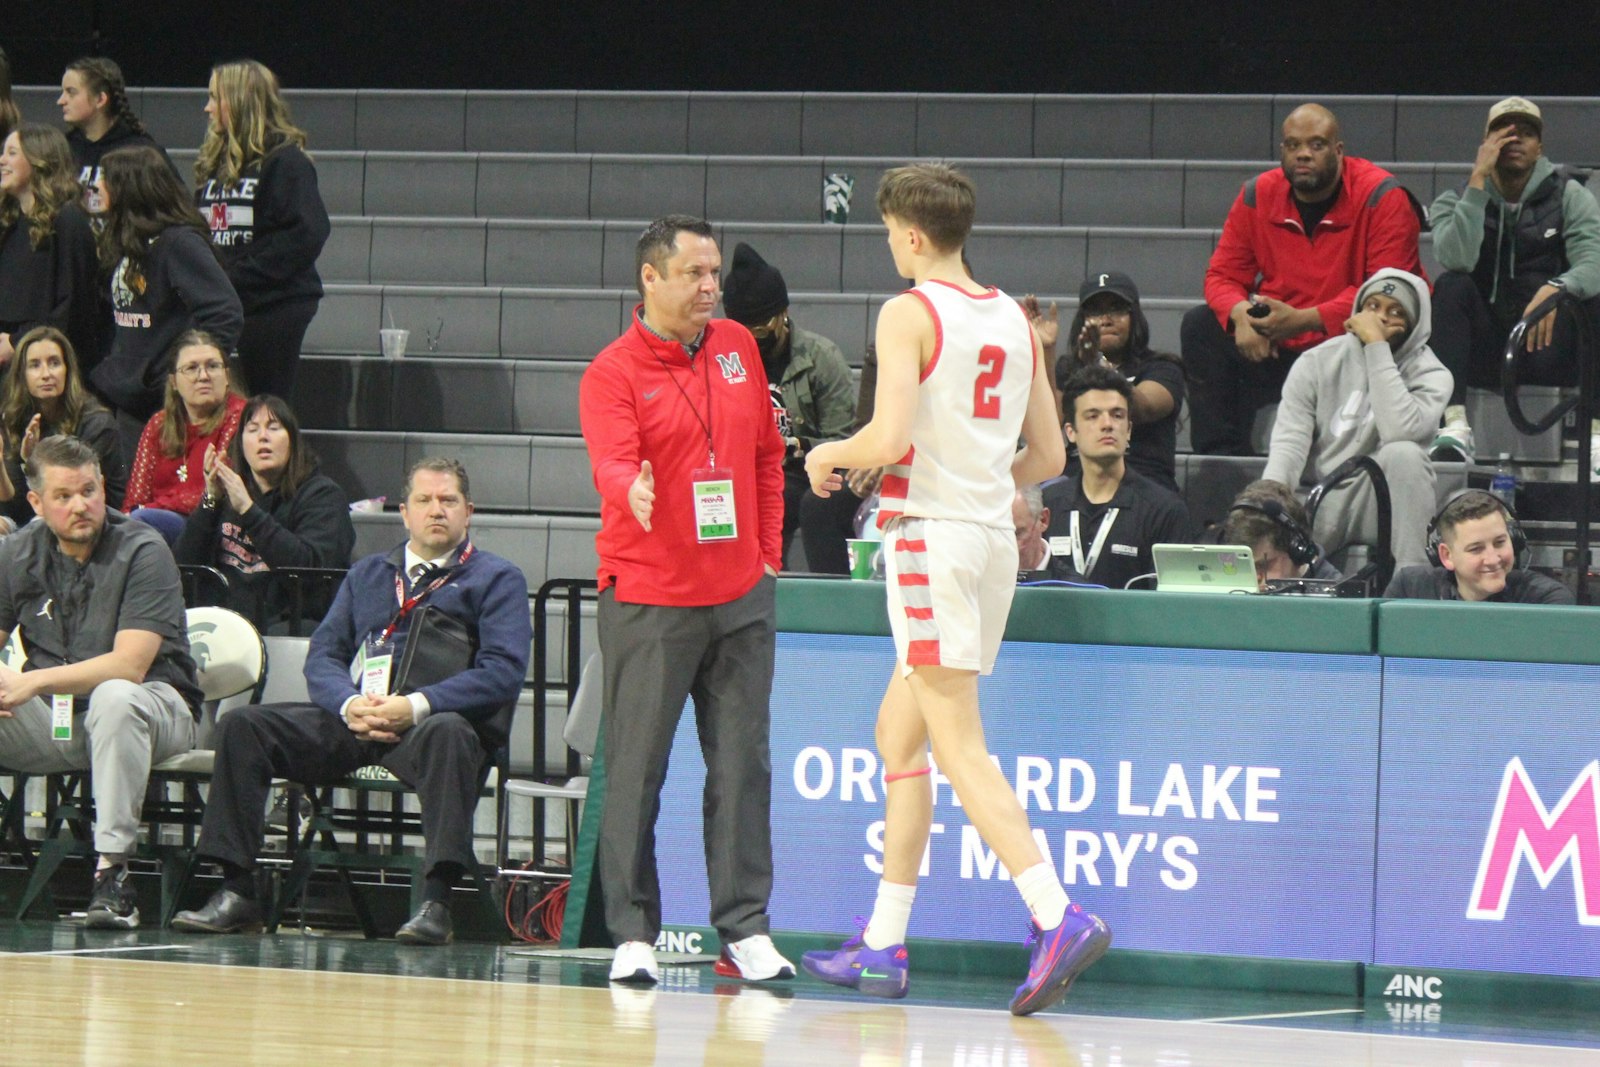 St. Mary’s coach Todd Covert congratulates junior guard Daniel Smythe for his efforts after leaving the court during the fourth quarter in the Eaglets’ loss to Muskegon in the state semi-finals.